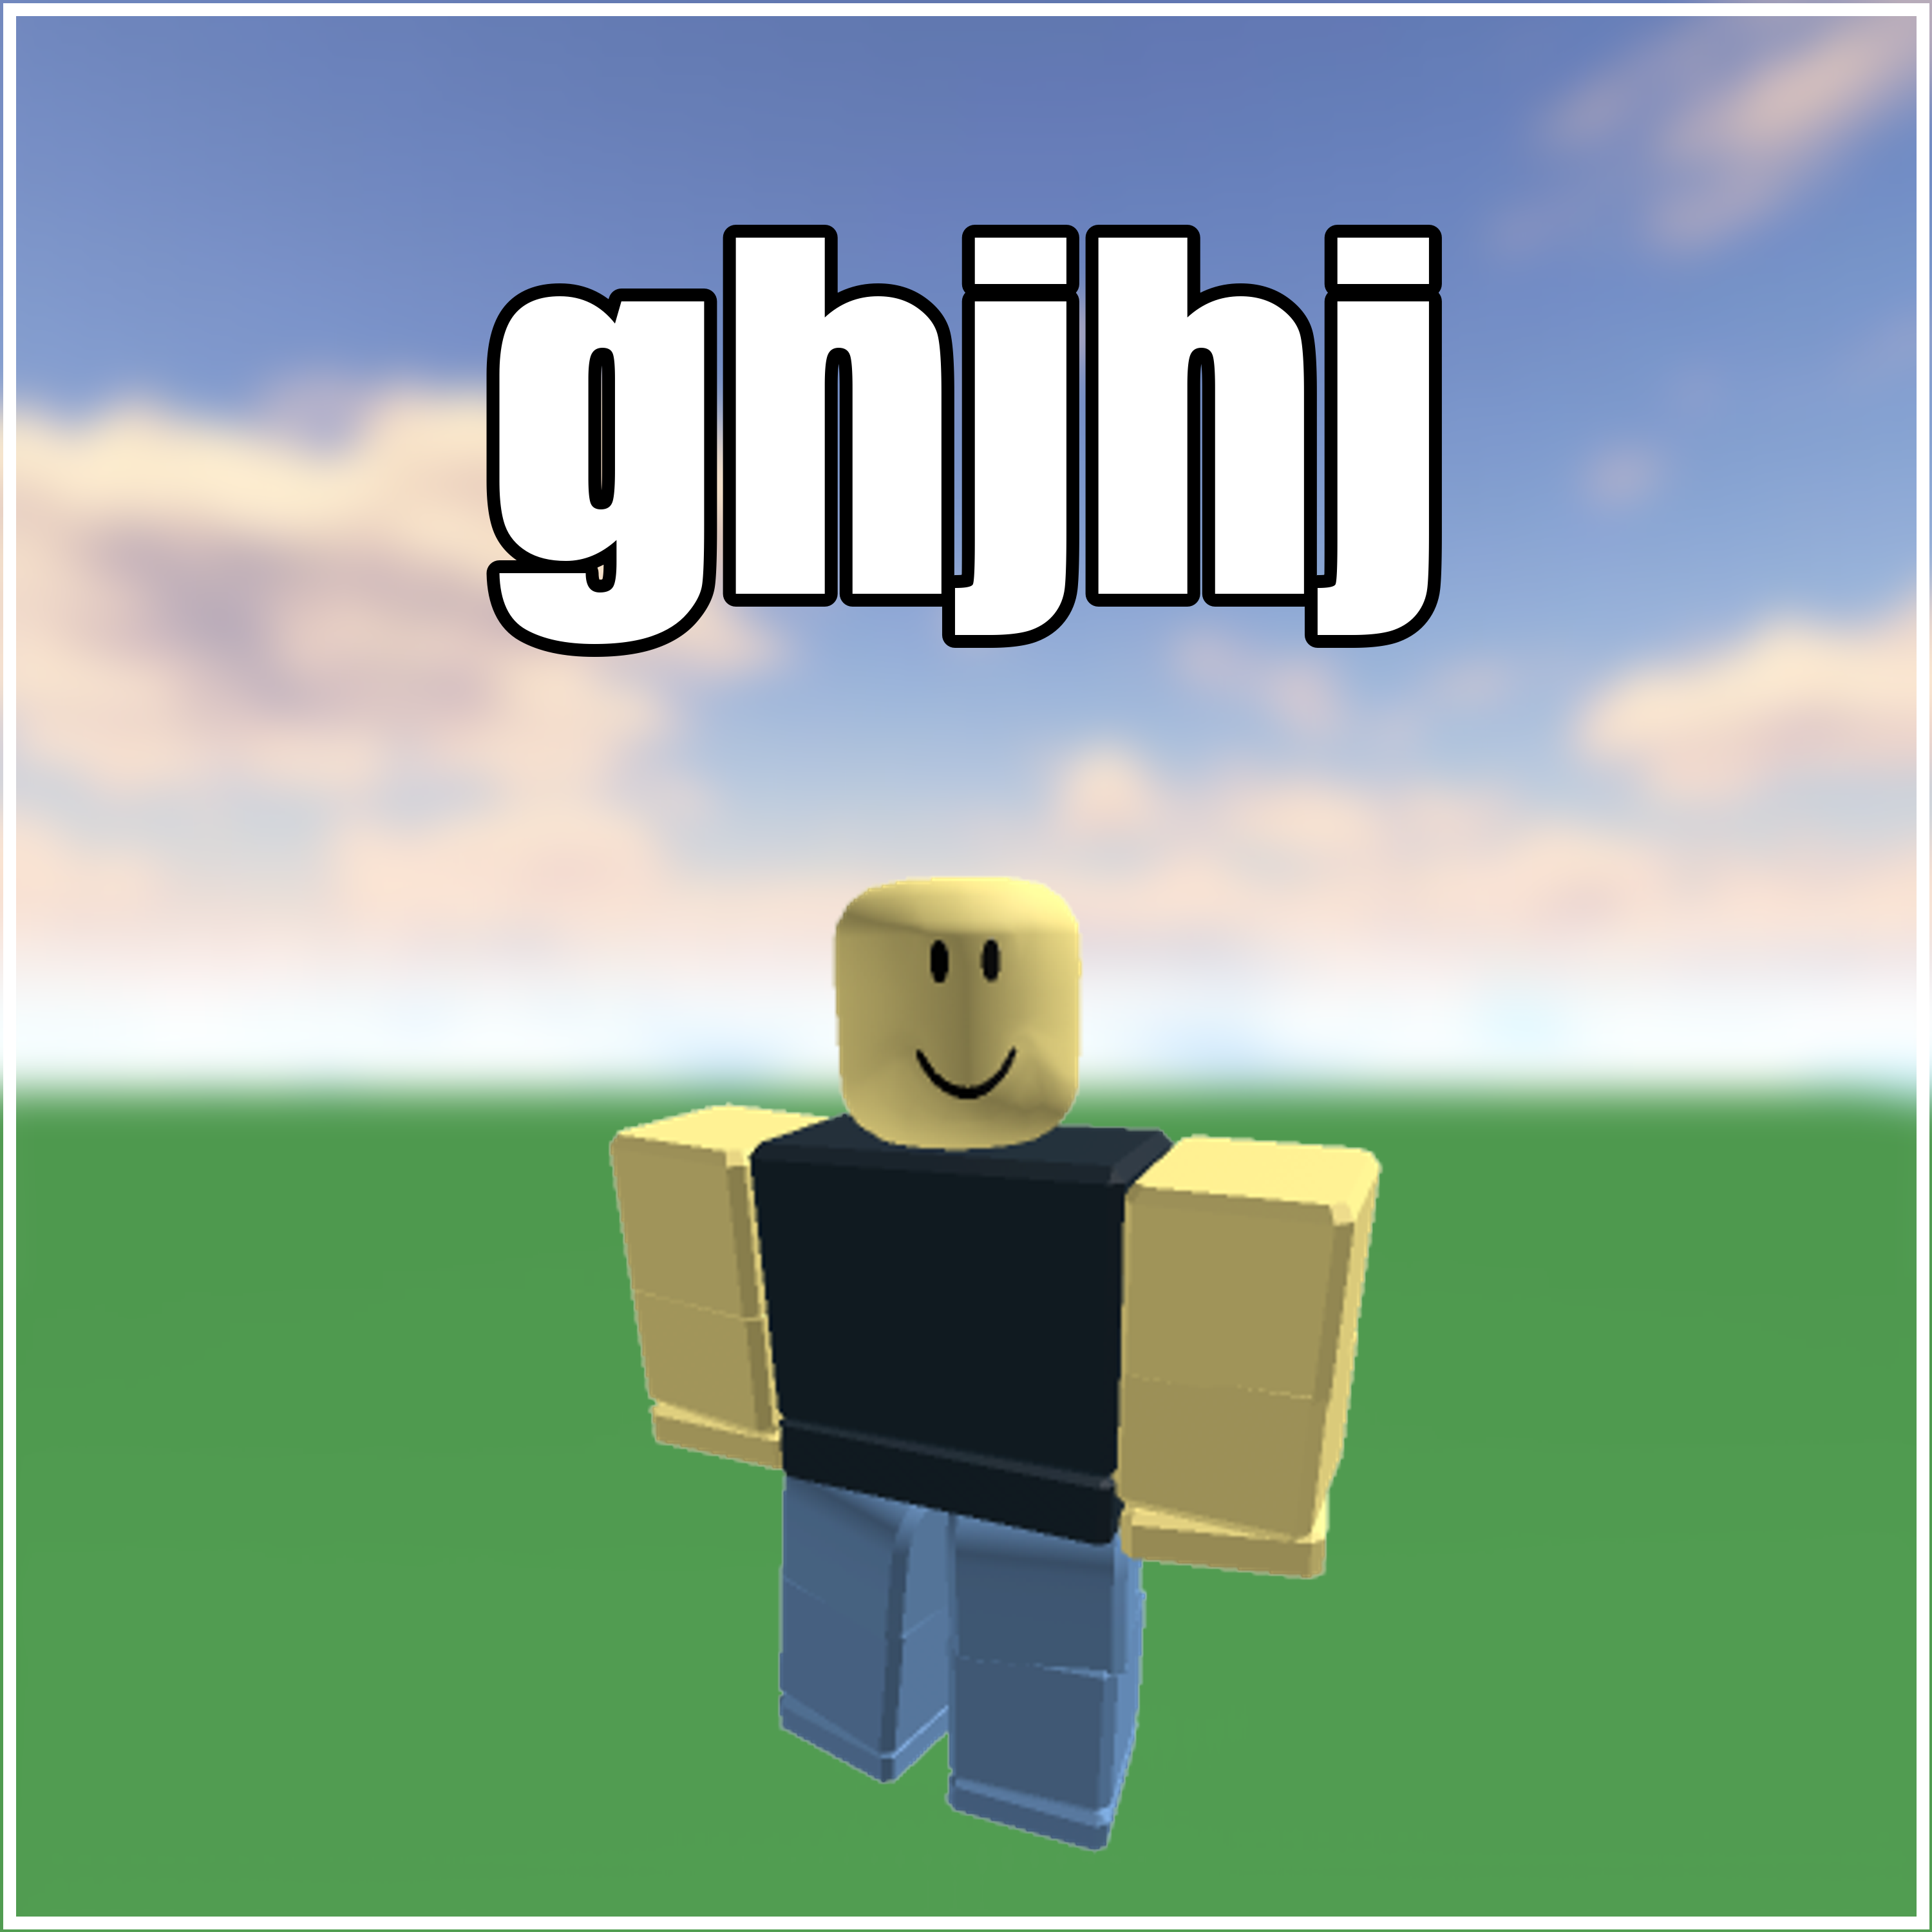 robruh RARE username "ghjhj" ROBLOX account guaranteed to be unverified!